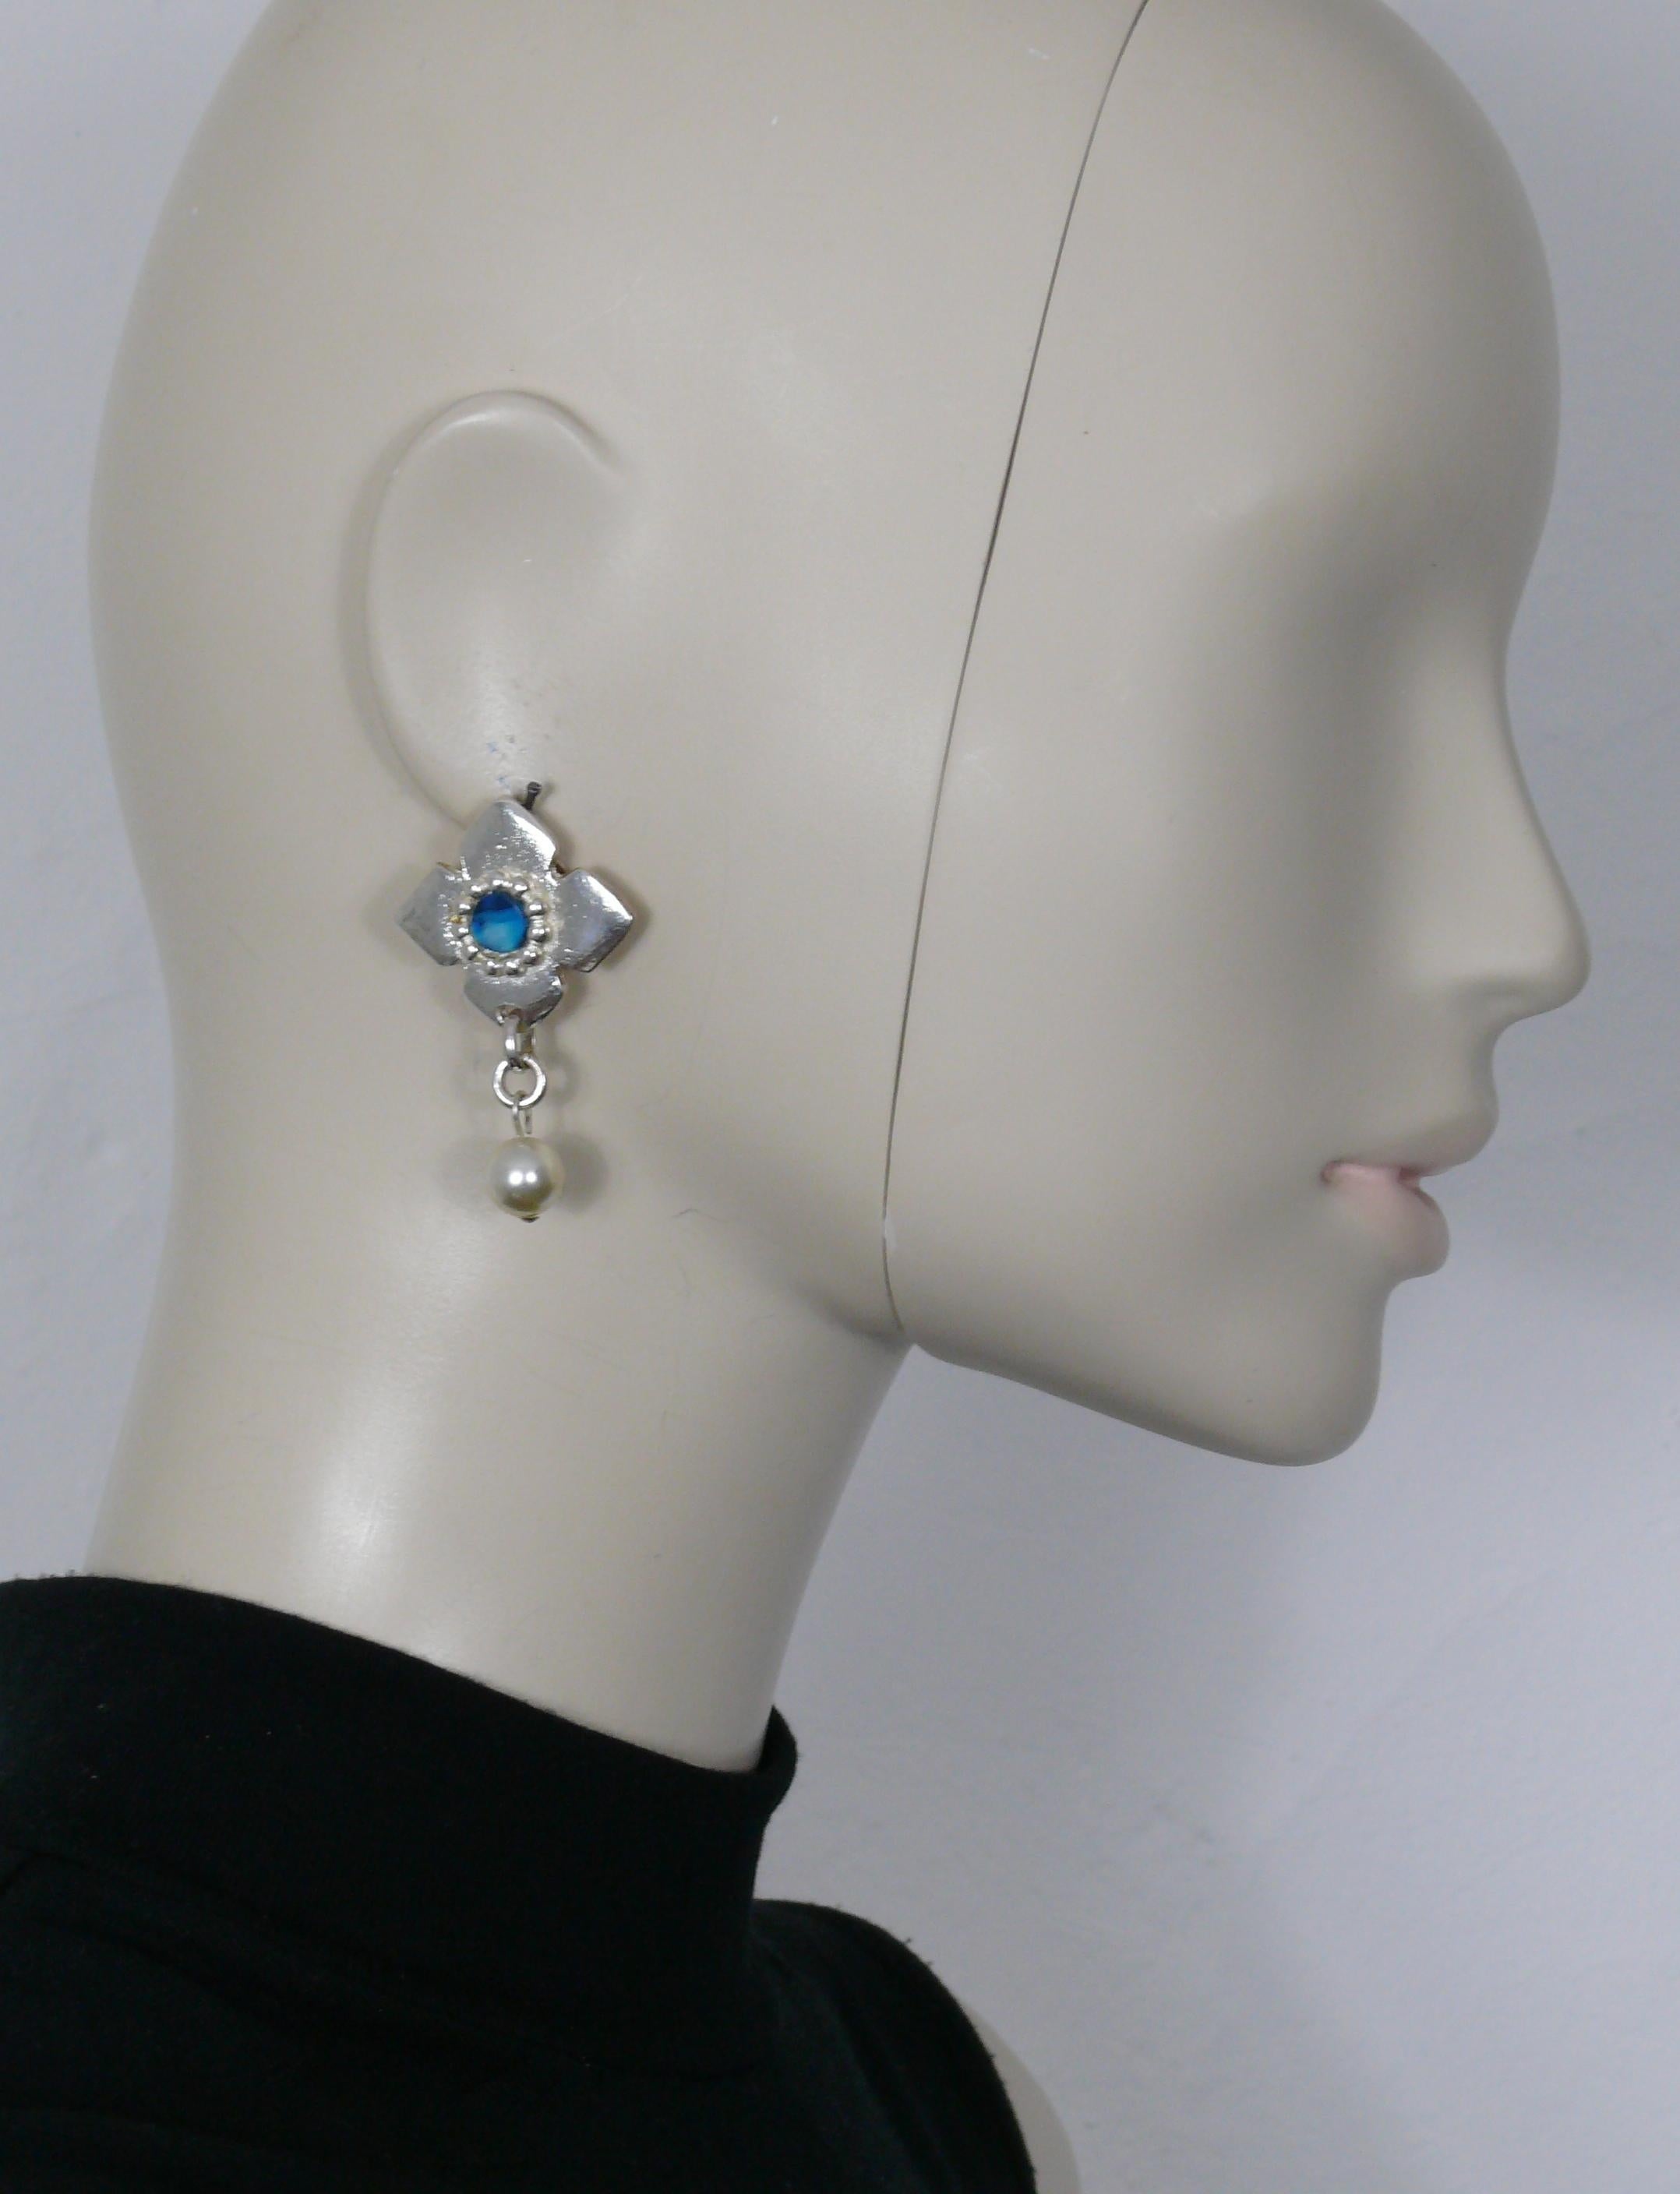 YVES SAINT LAURENT vintage silver tone dangling earrings (clip on) embellished with a blue marbled resin center and a faux pearl drop.

Embossed YSL Made in France on each earring.
Please note that only one earring is embossed YSL on the clip back